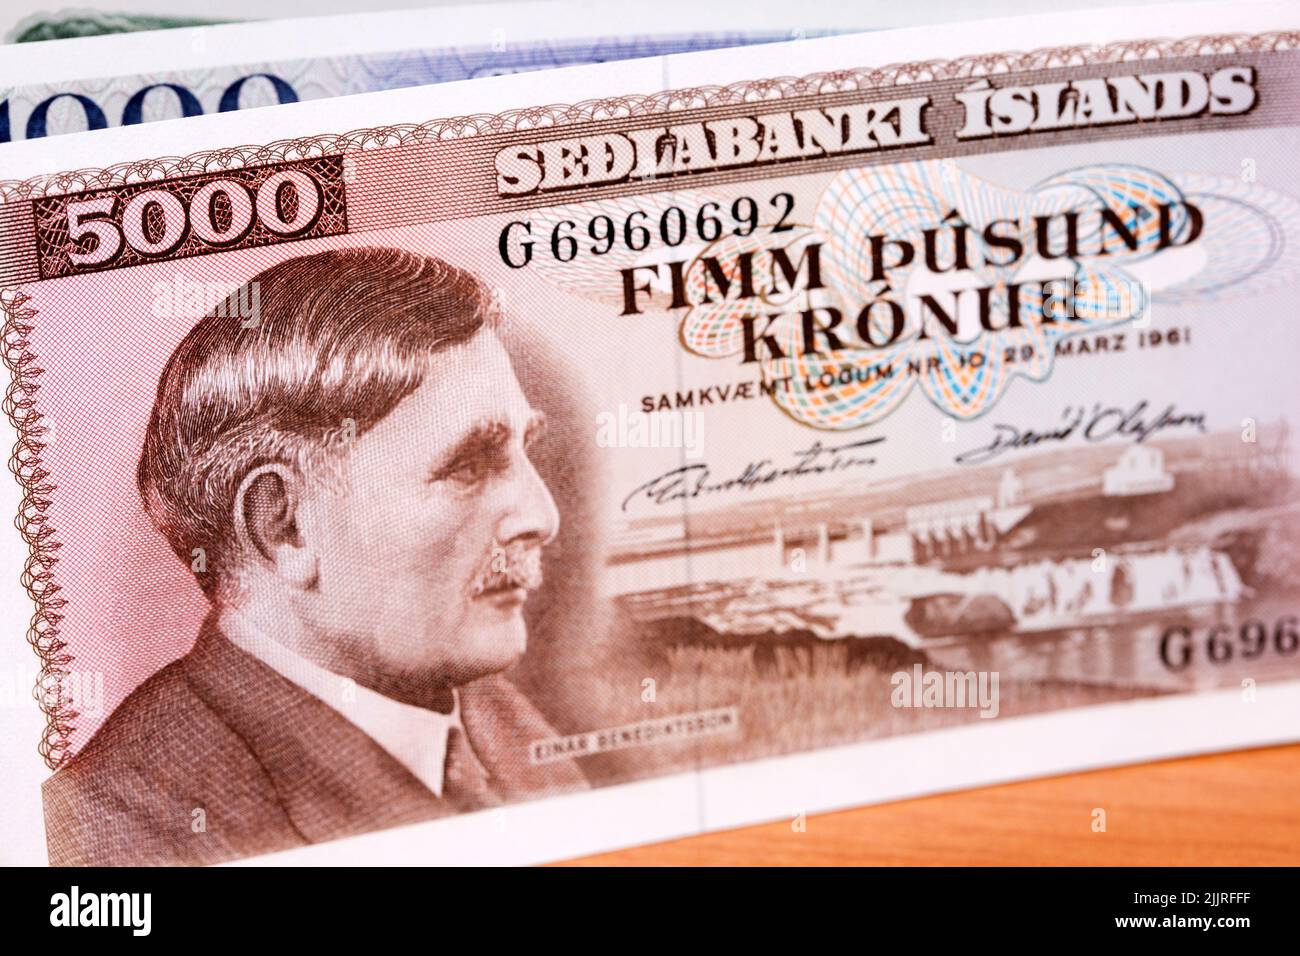 Old Icelandic money - crown a business background Stock Photo